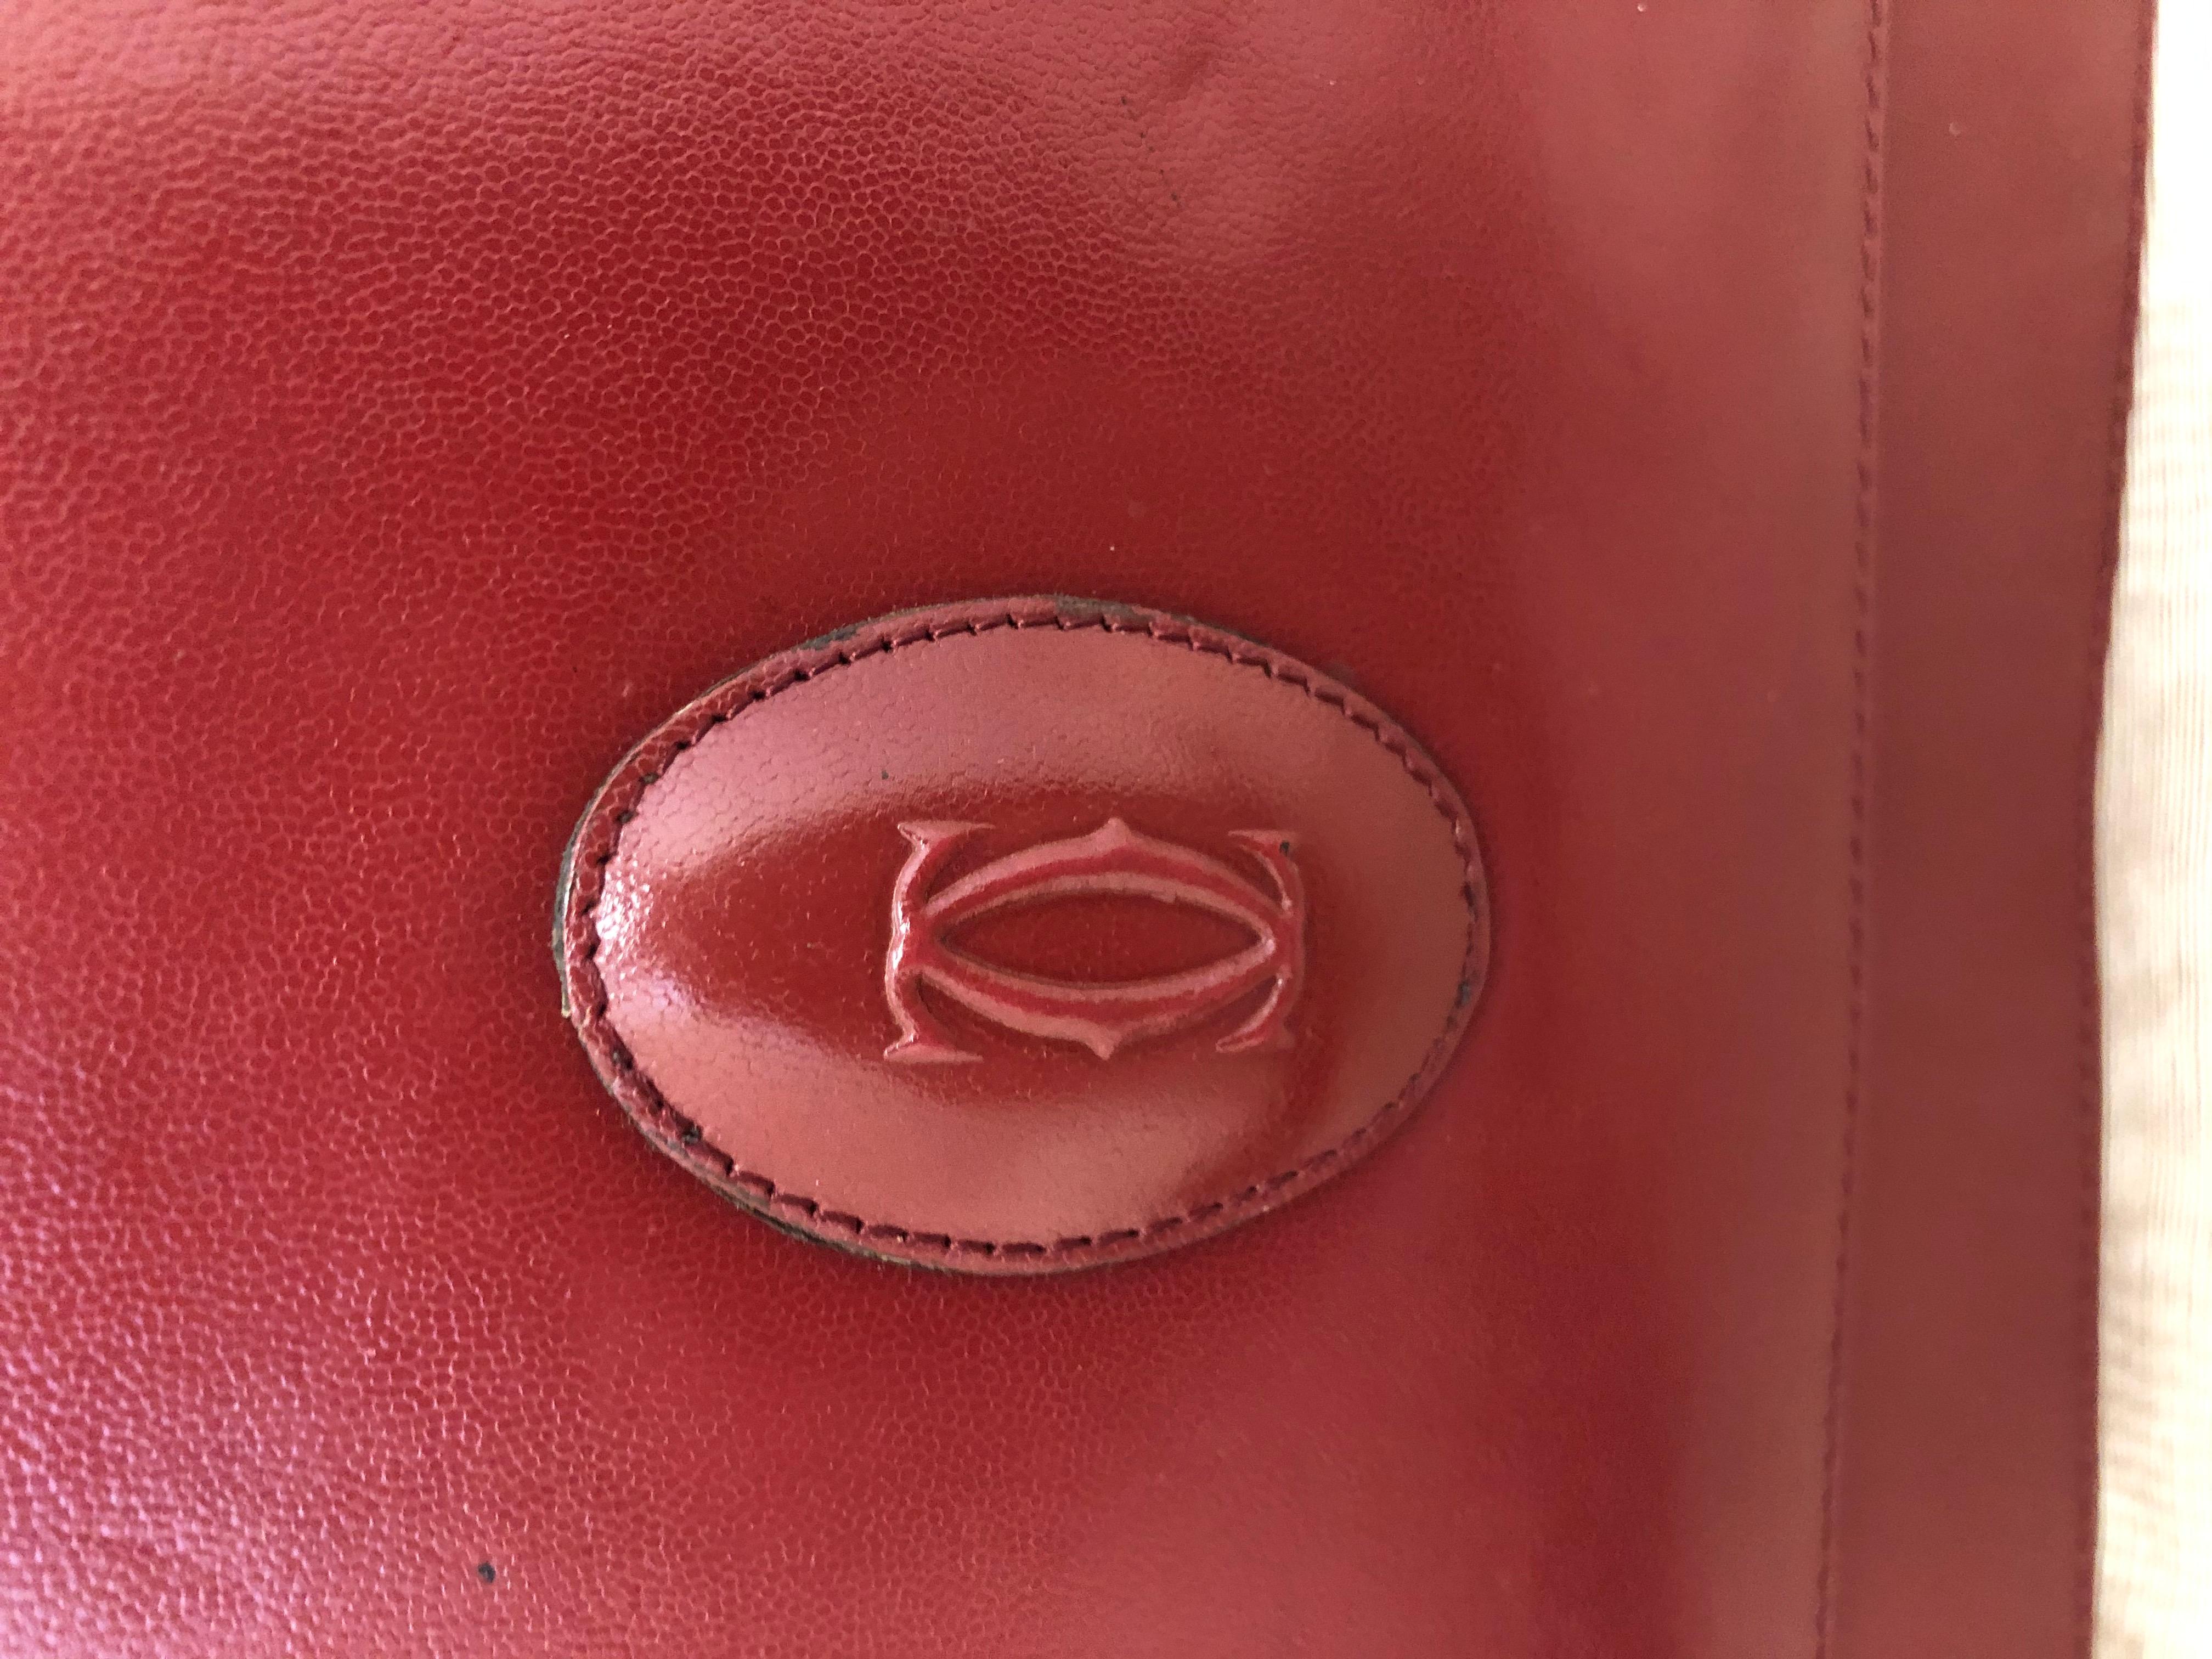 Made in France, this Cartier handbag is in excellent condition, with only a slight depression mark on the front (pictured). This handbag has a flap closure, adjustable strap and inside storage pockets. There is a nice Cartier medallion on the front,